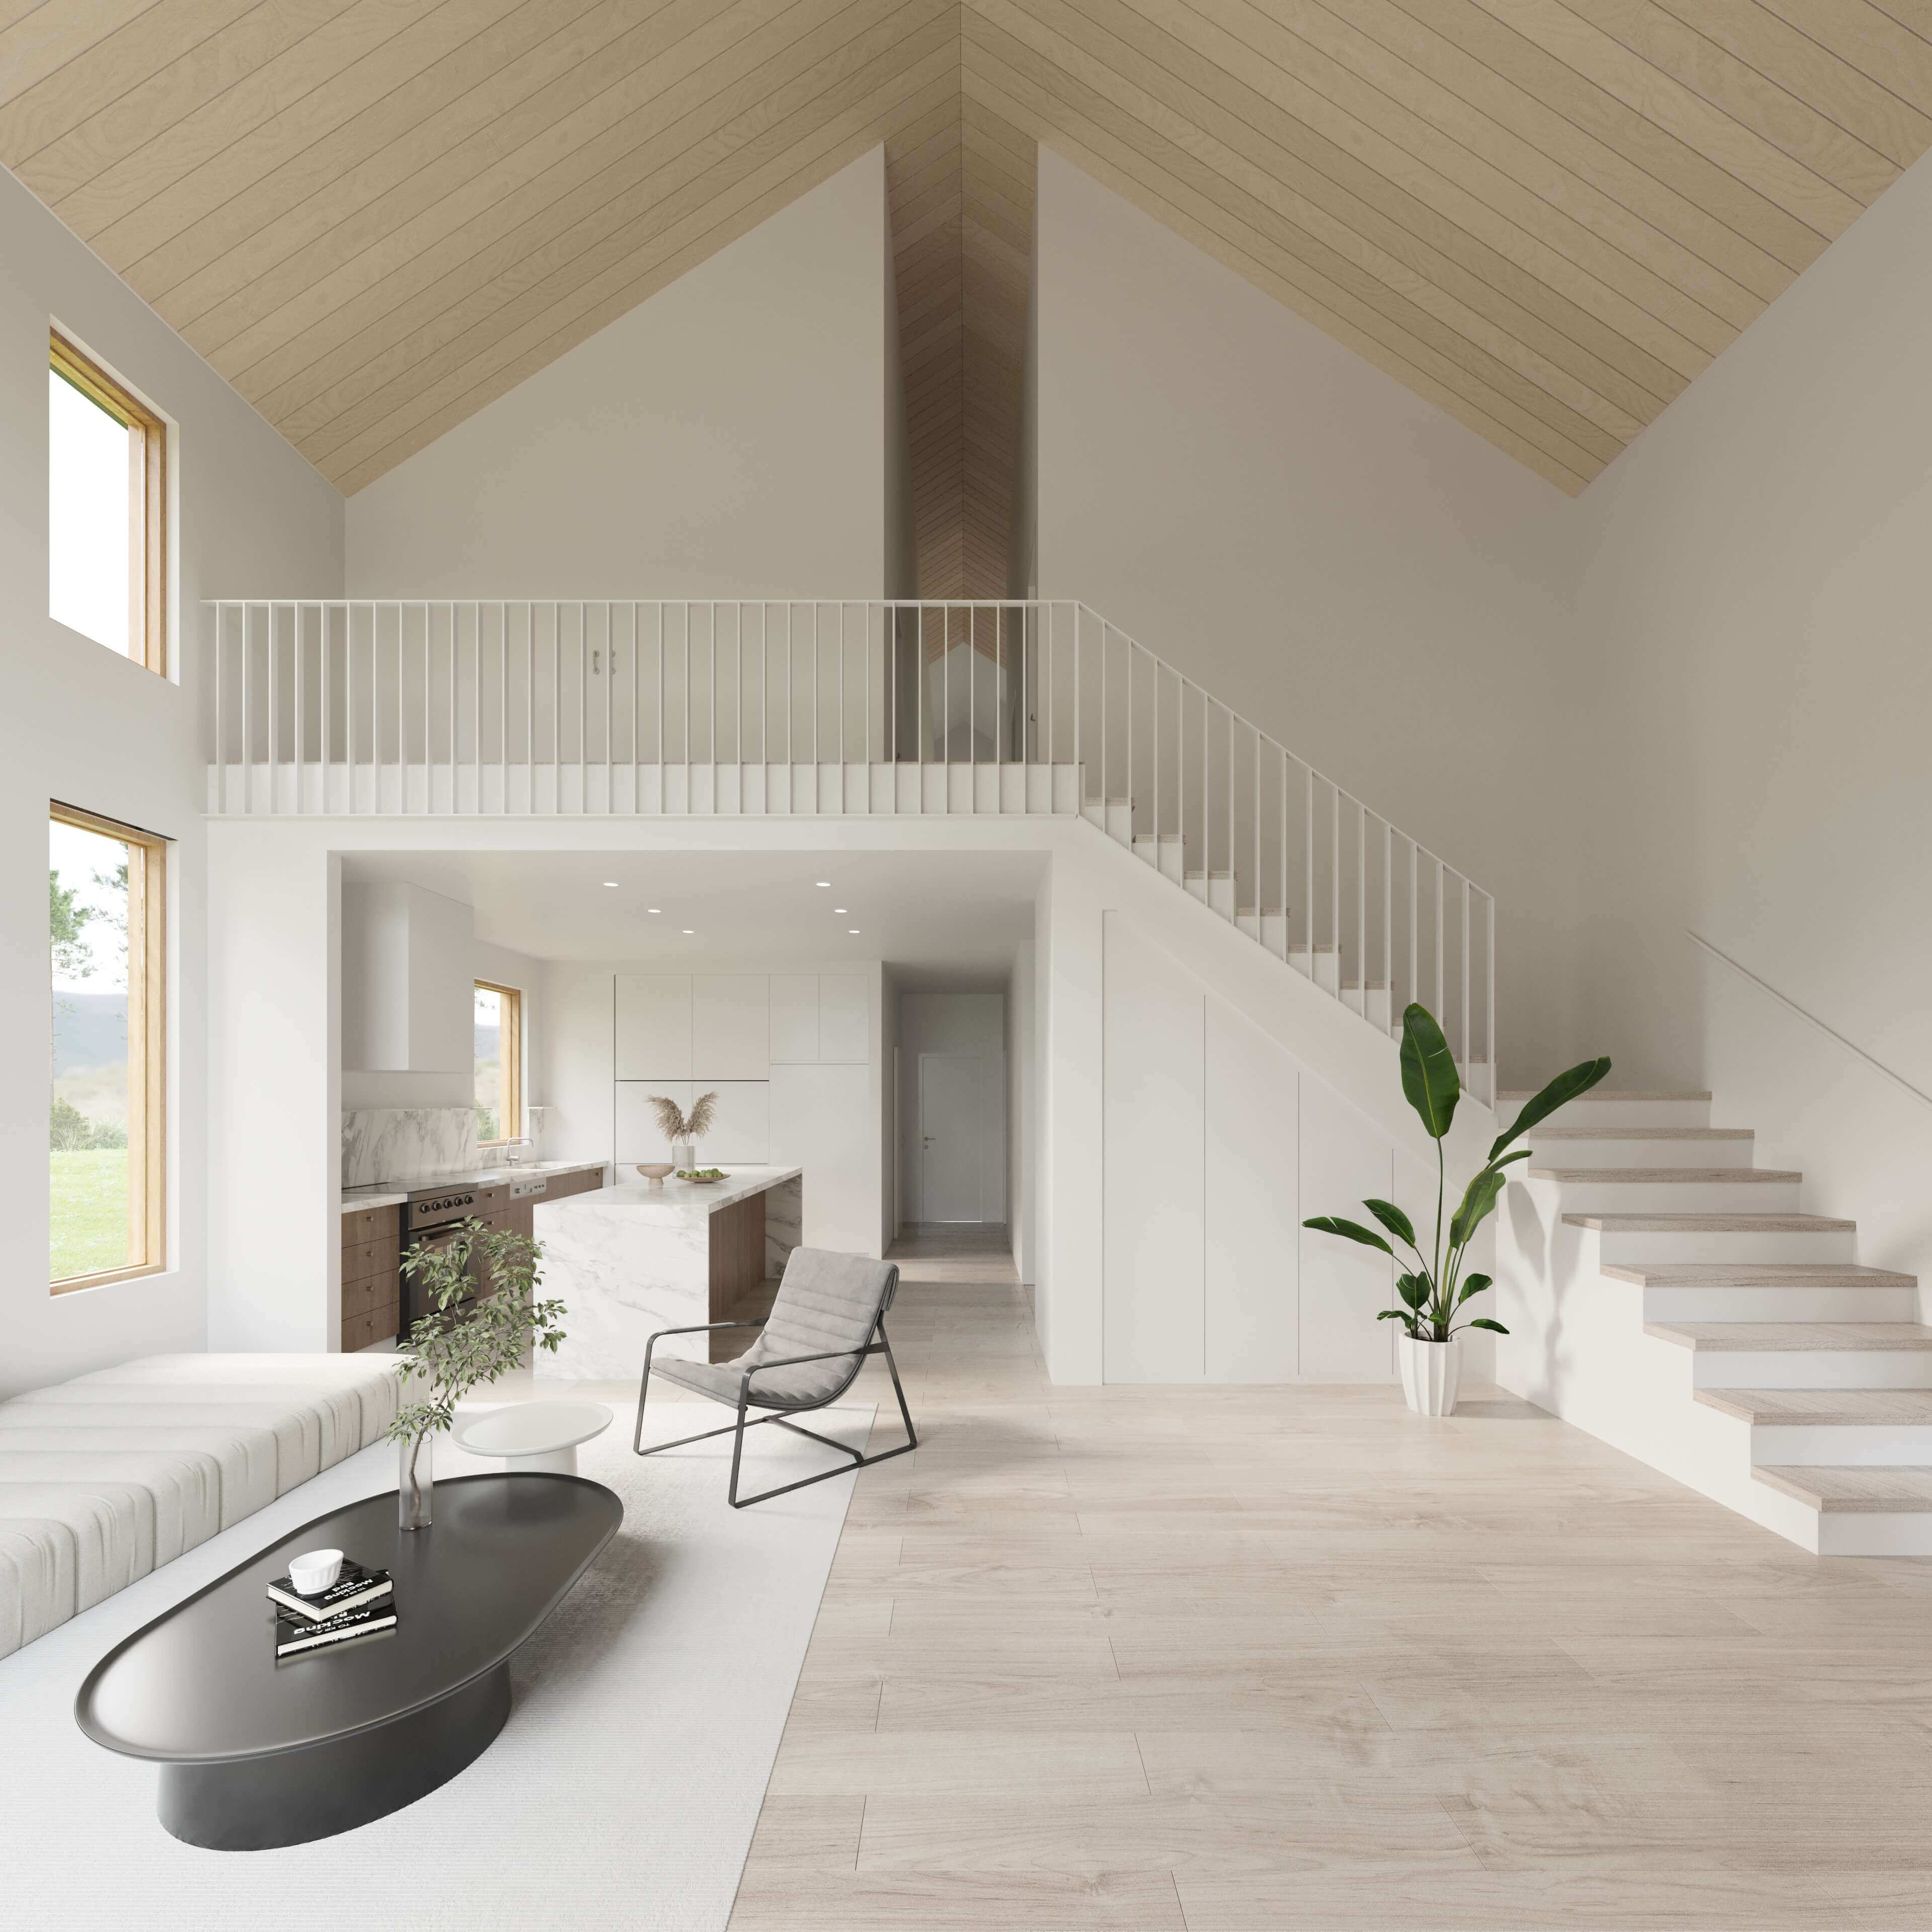 barndominium house plans: DWF Twin House Interior with High ceiling and Neutral Tone Interiors